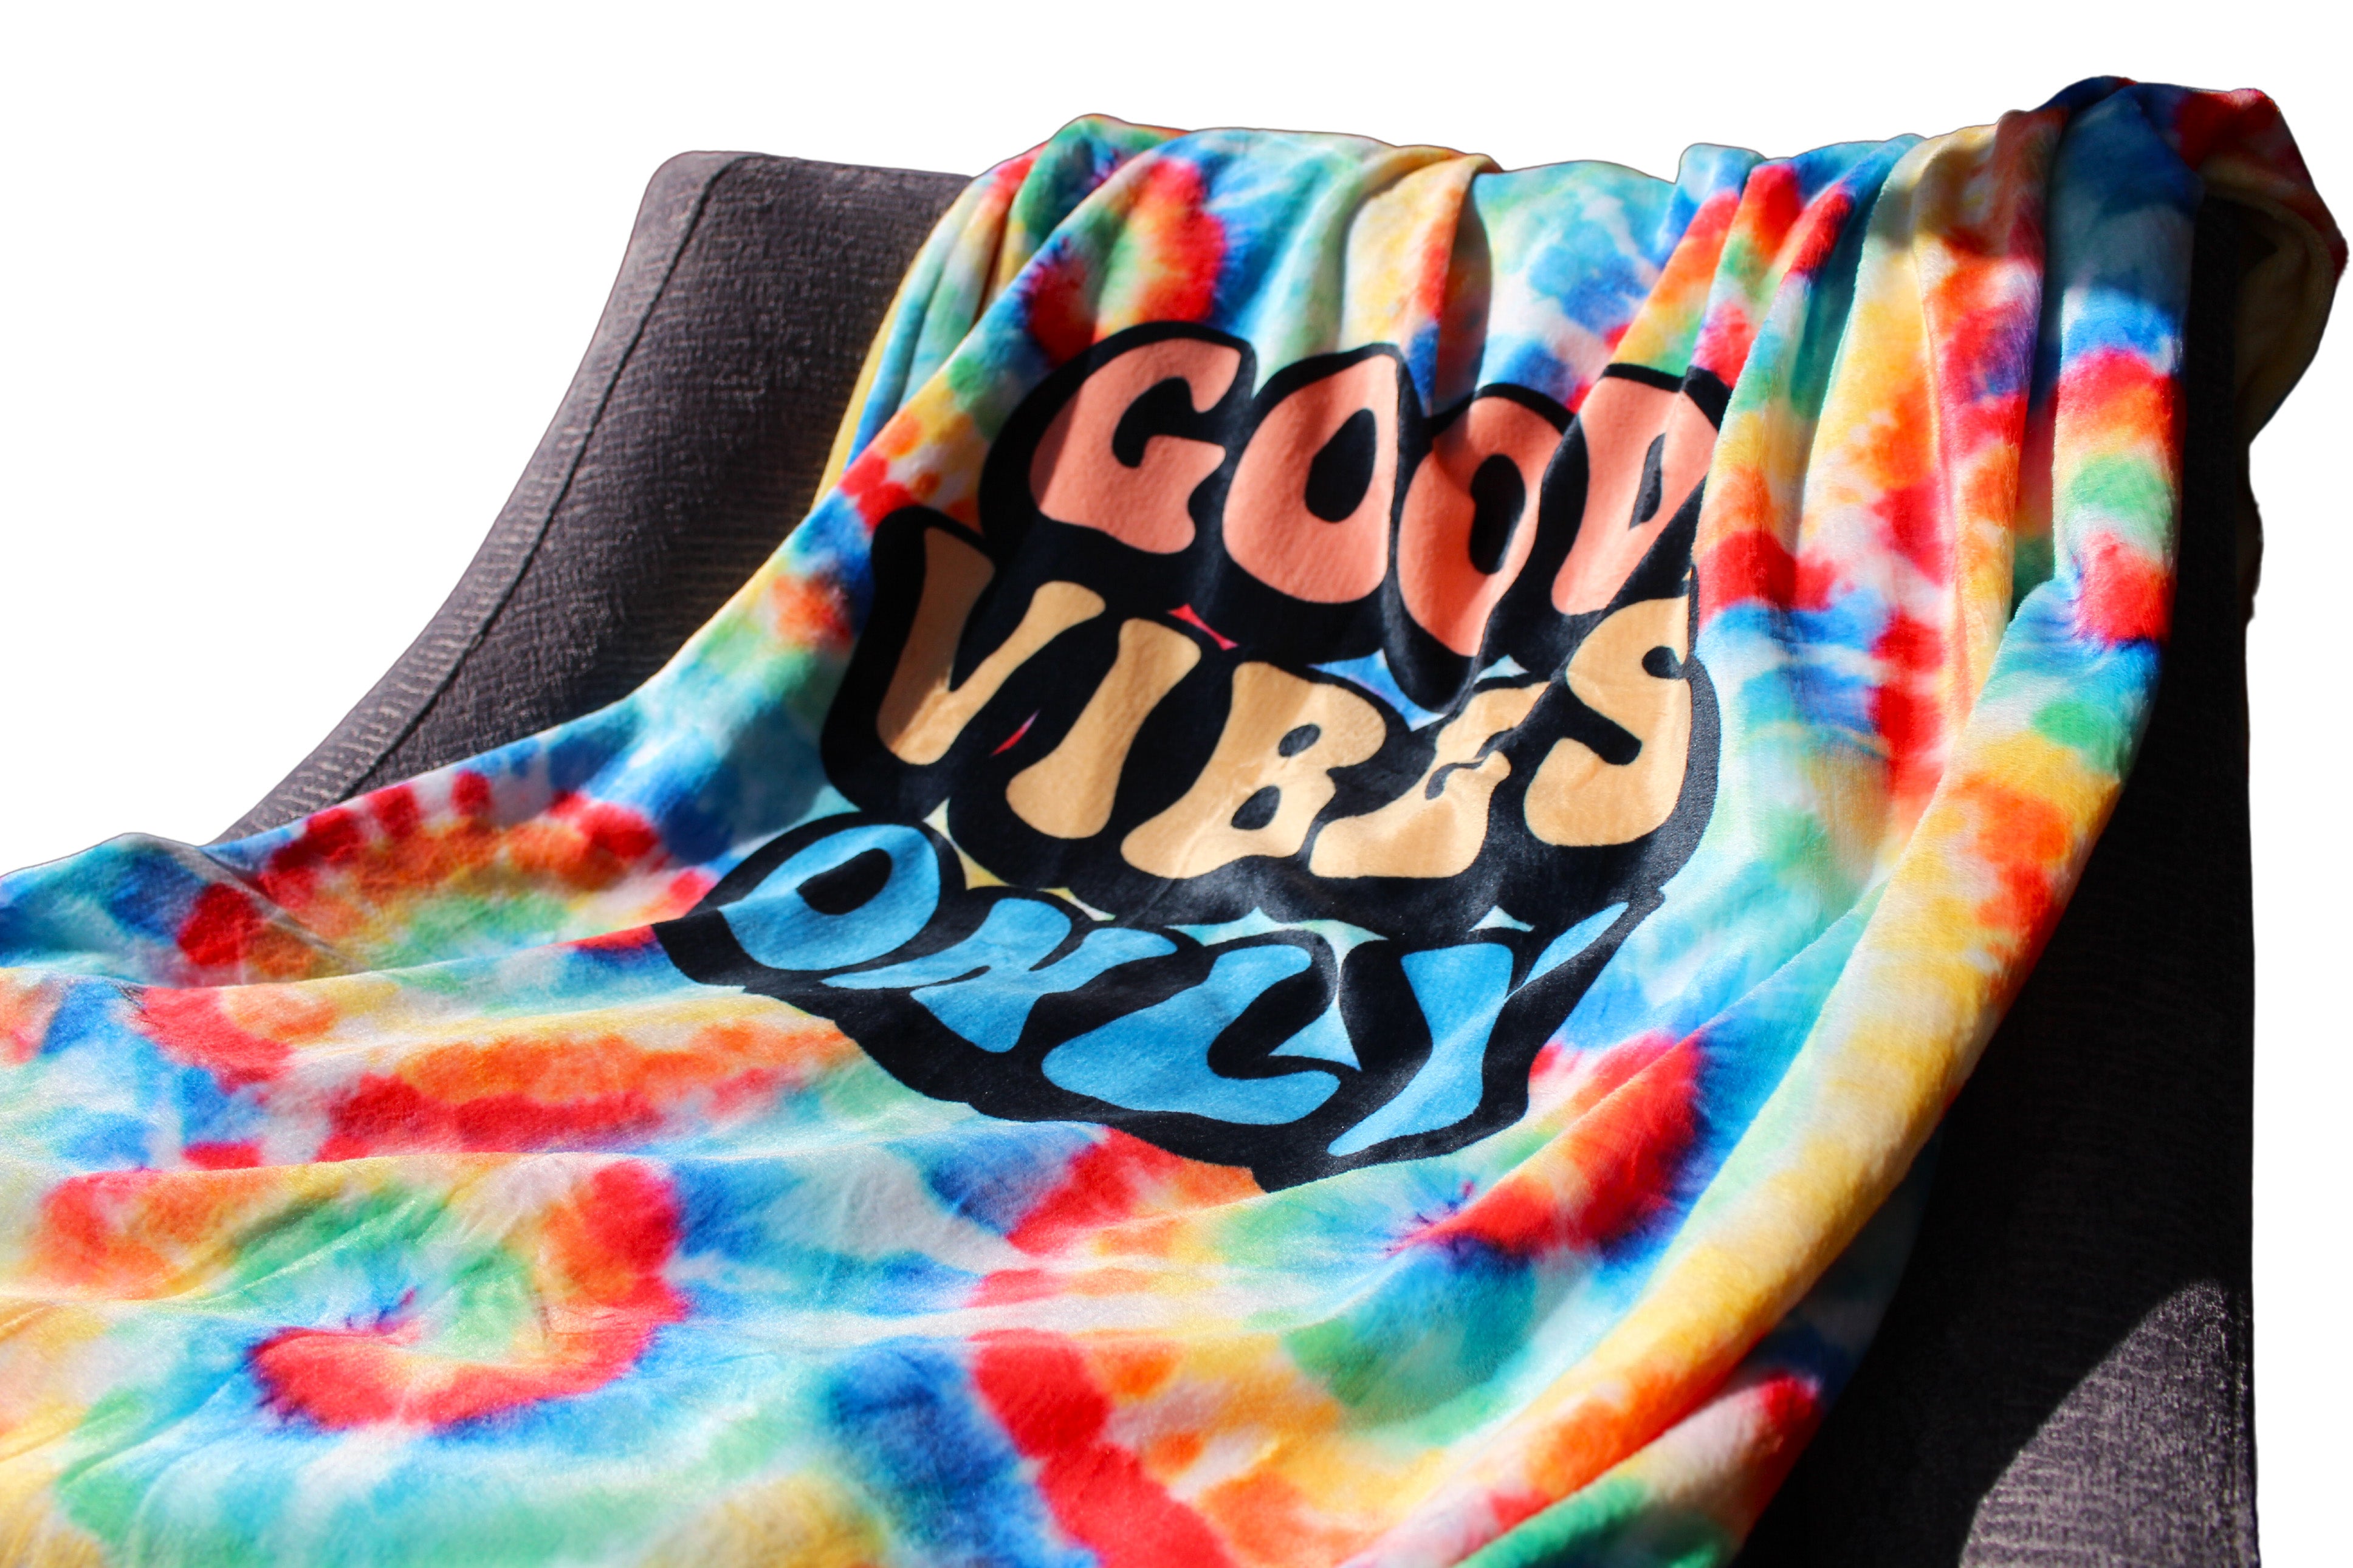 Good Vibes Only blanket laid out on chair